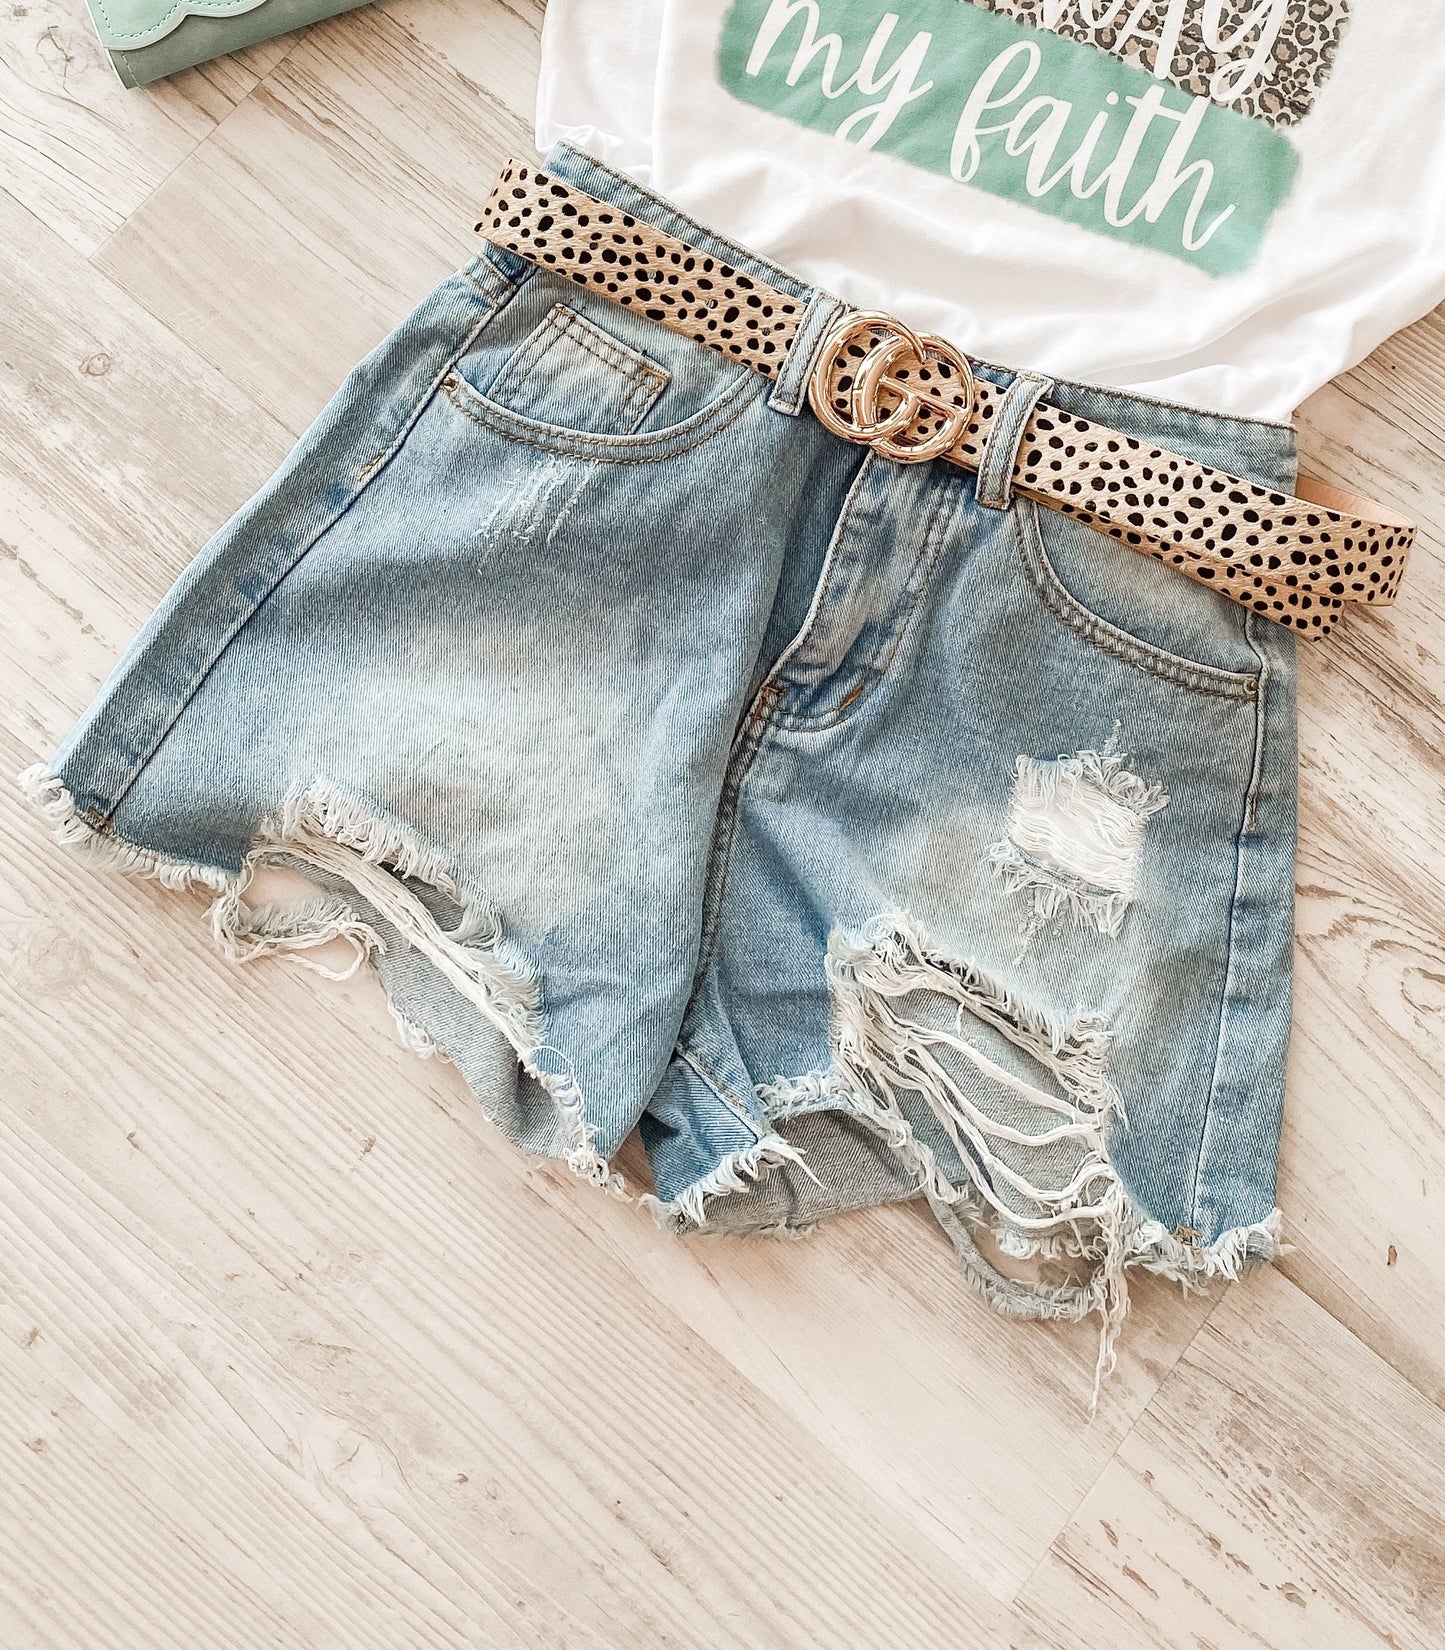 Sunny Day Denim Shorts - Southern Grace Creations